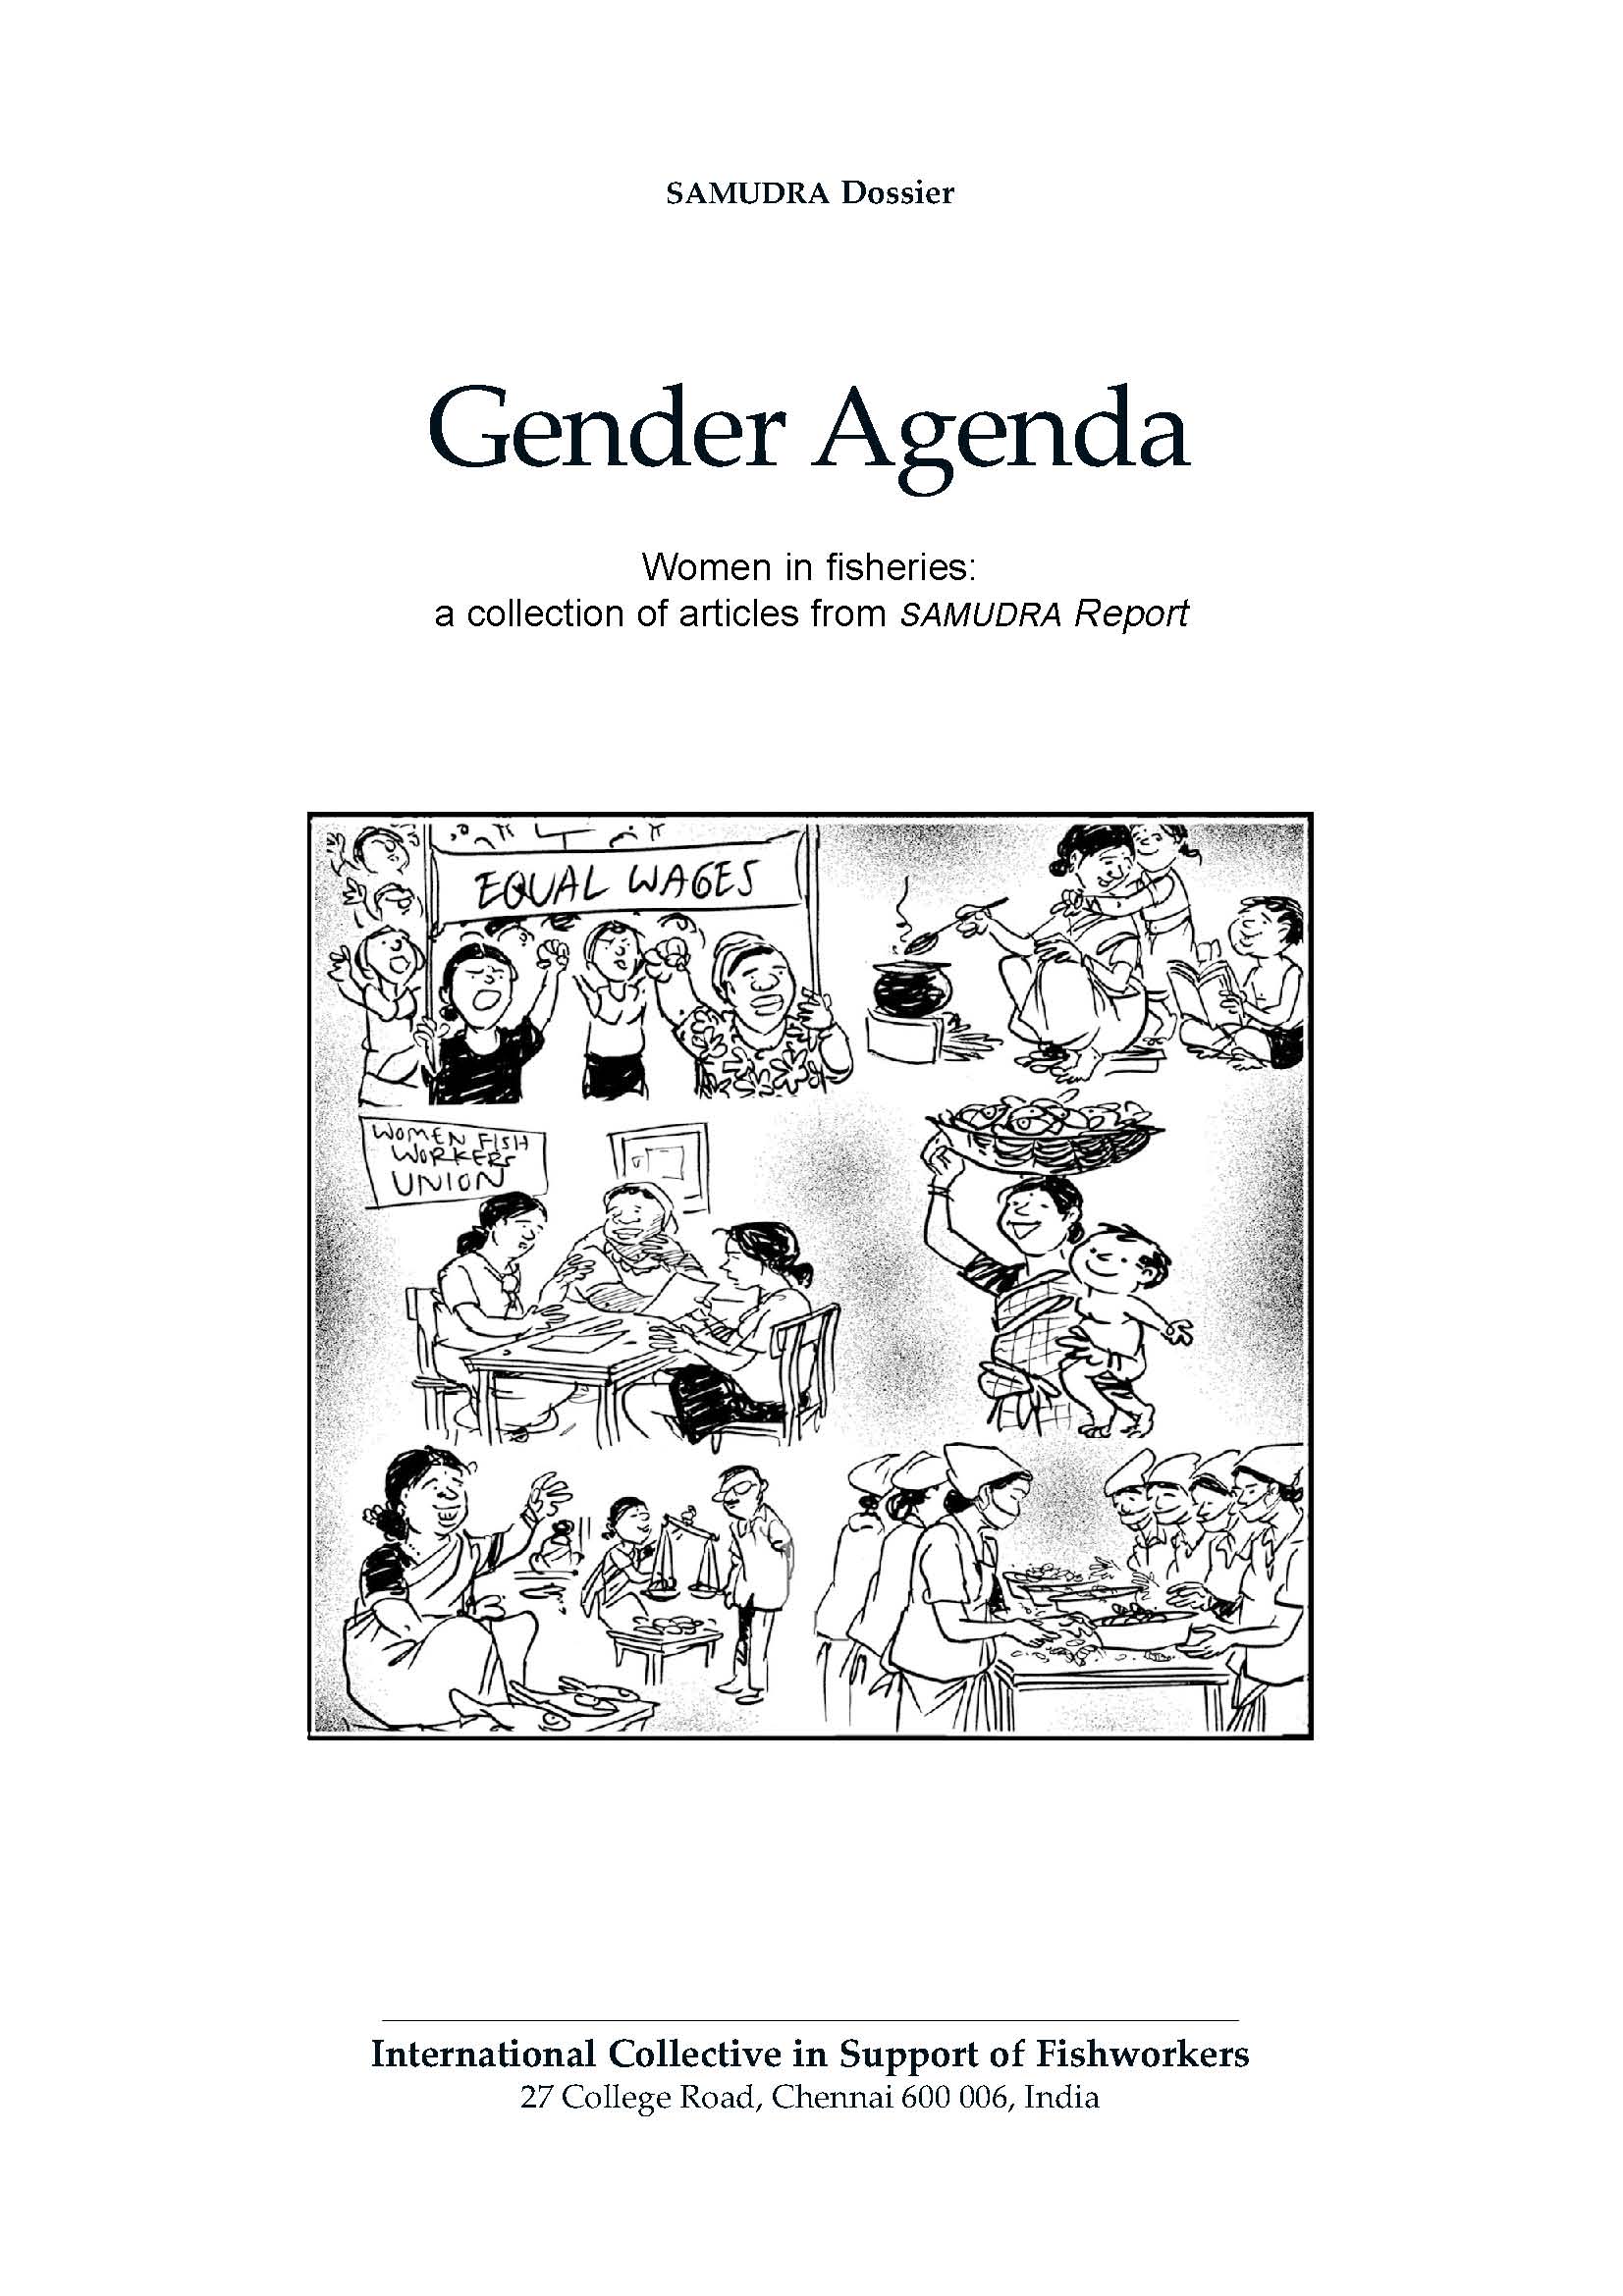 Gender Agenda – Women in fisheries: A collection of articles from SAMUDRA Report